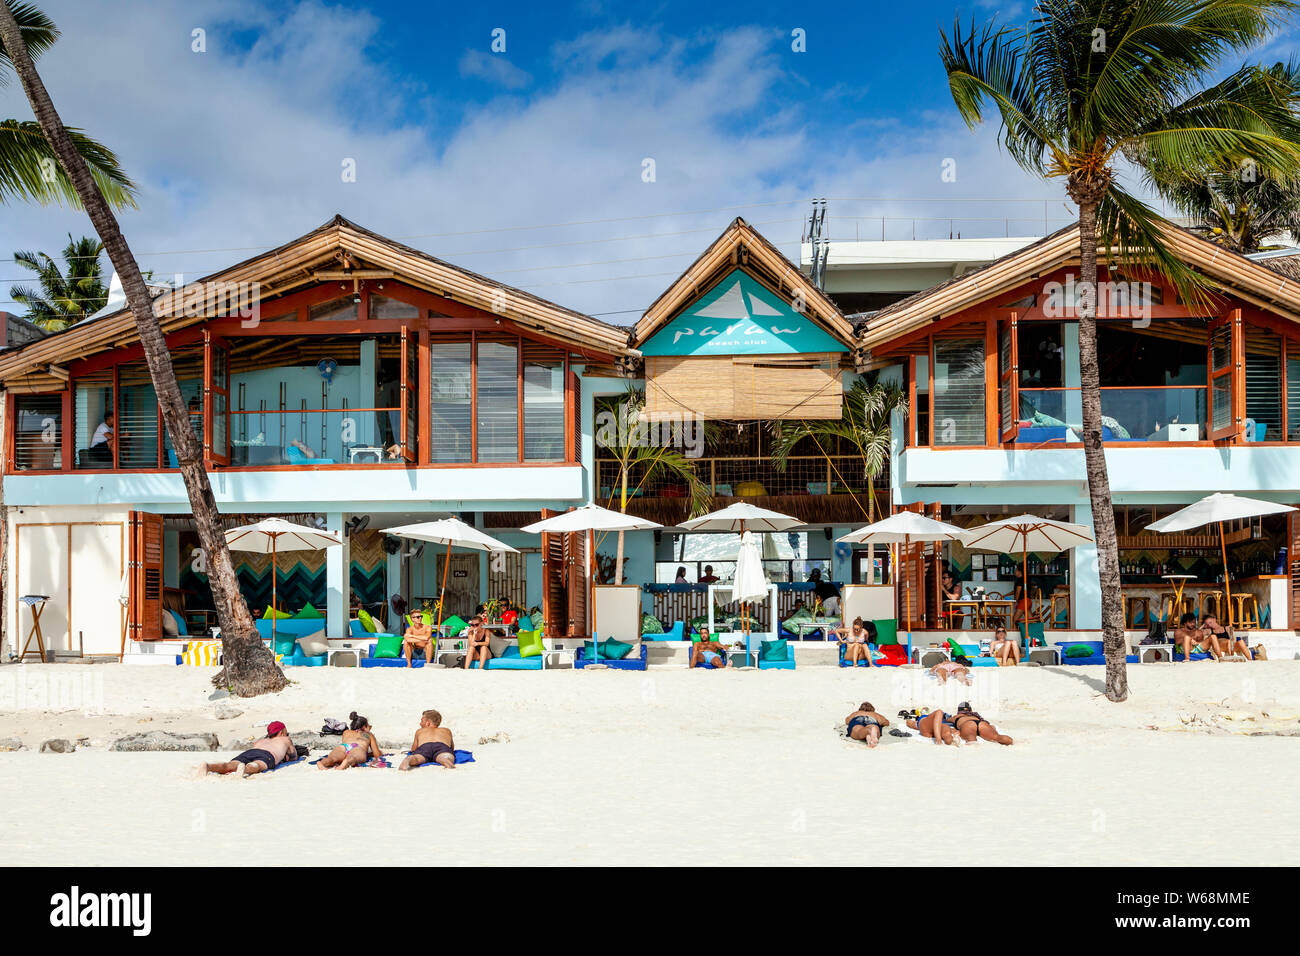 Paraw Beach Club, White Beach, Boracay, Province d'Aklan, Philippines Banque D'Images